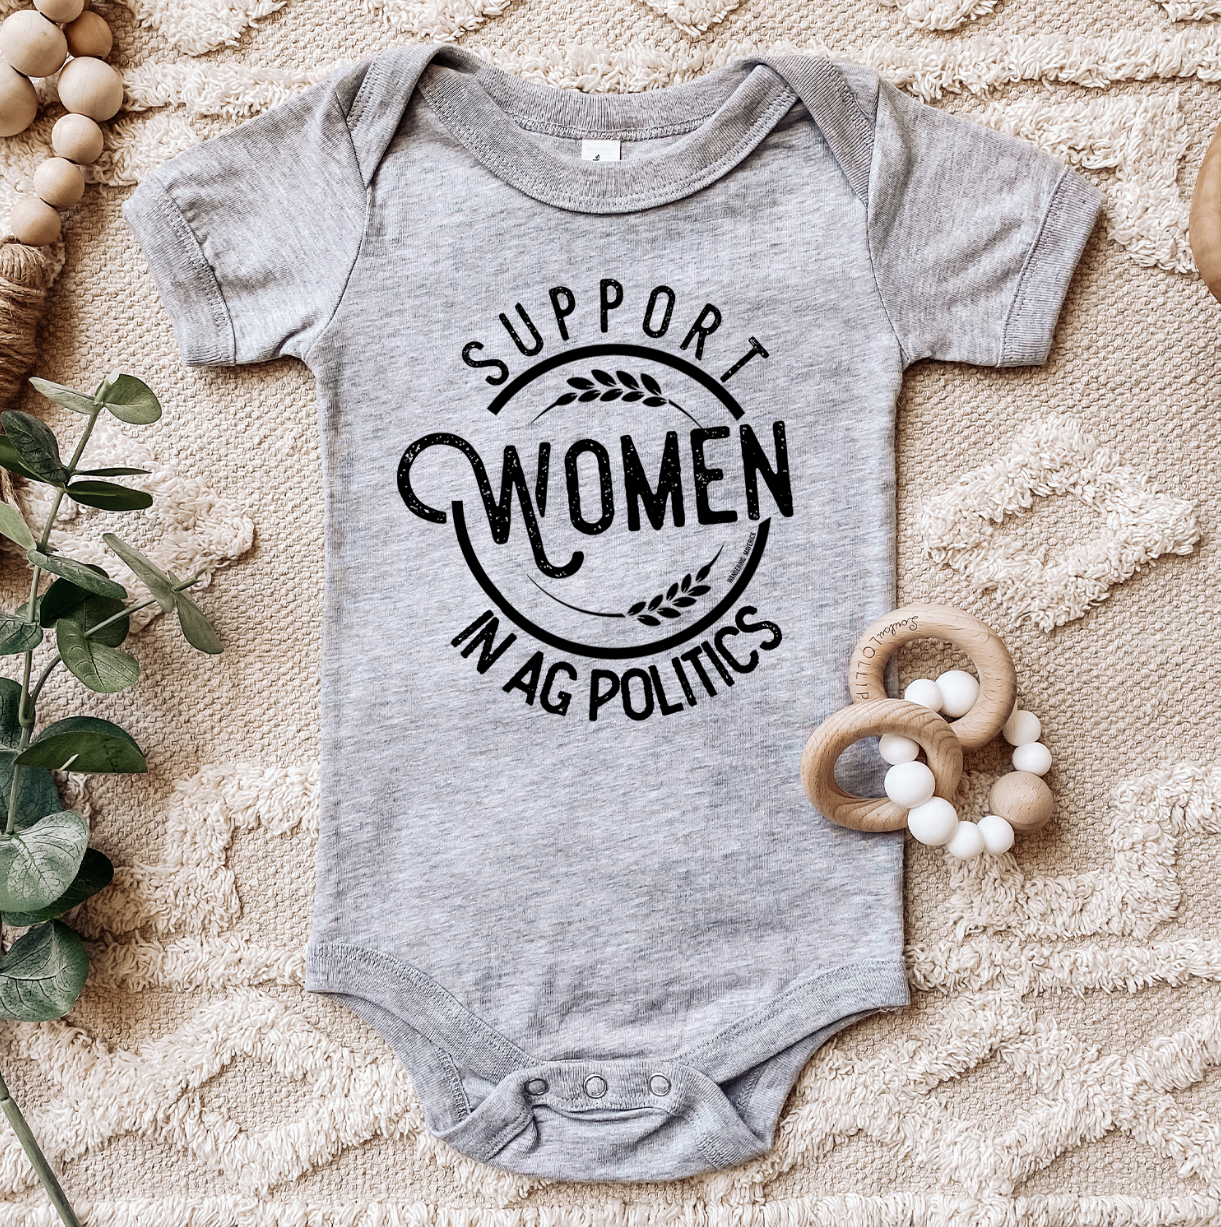 Support Women In Ag Politics One Piece/T-Shirt (Newborn - Youth XL) - Multiple Colors!